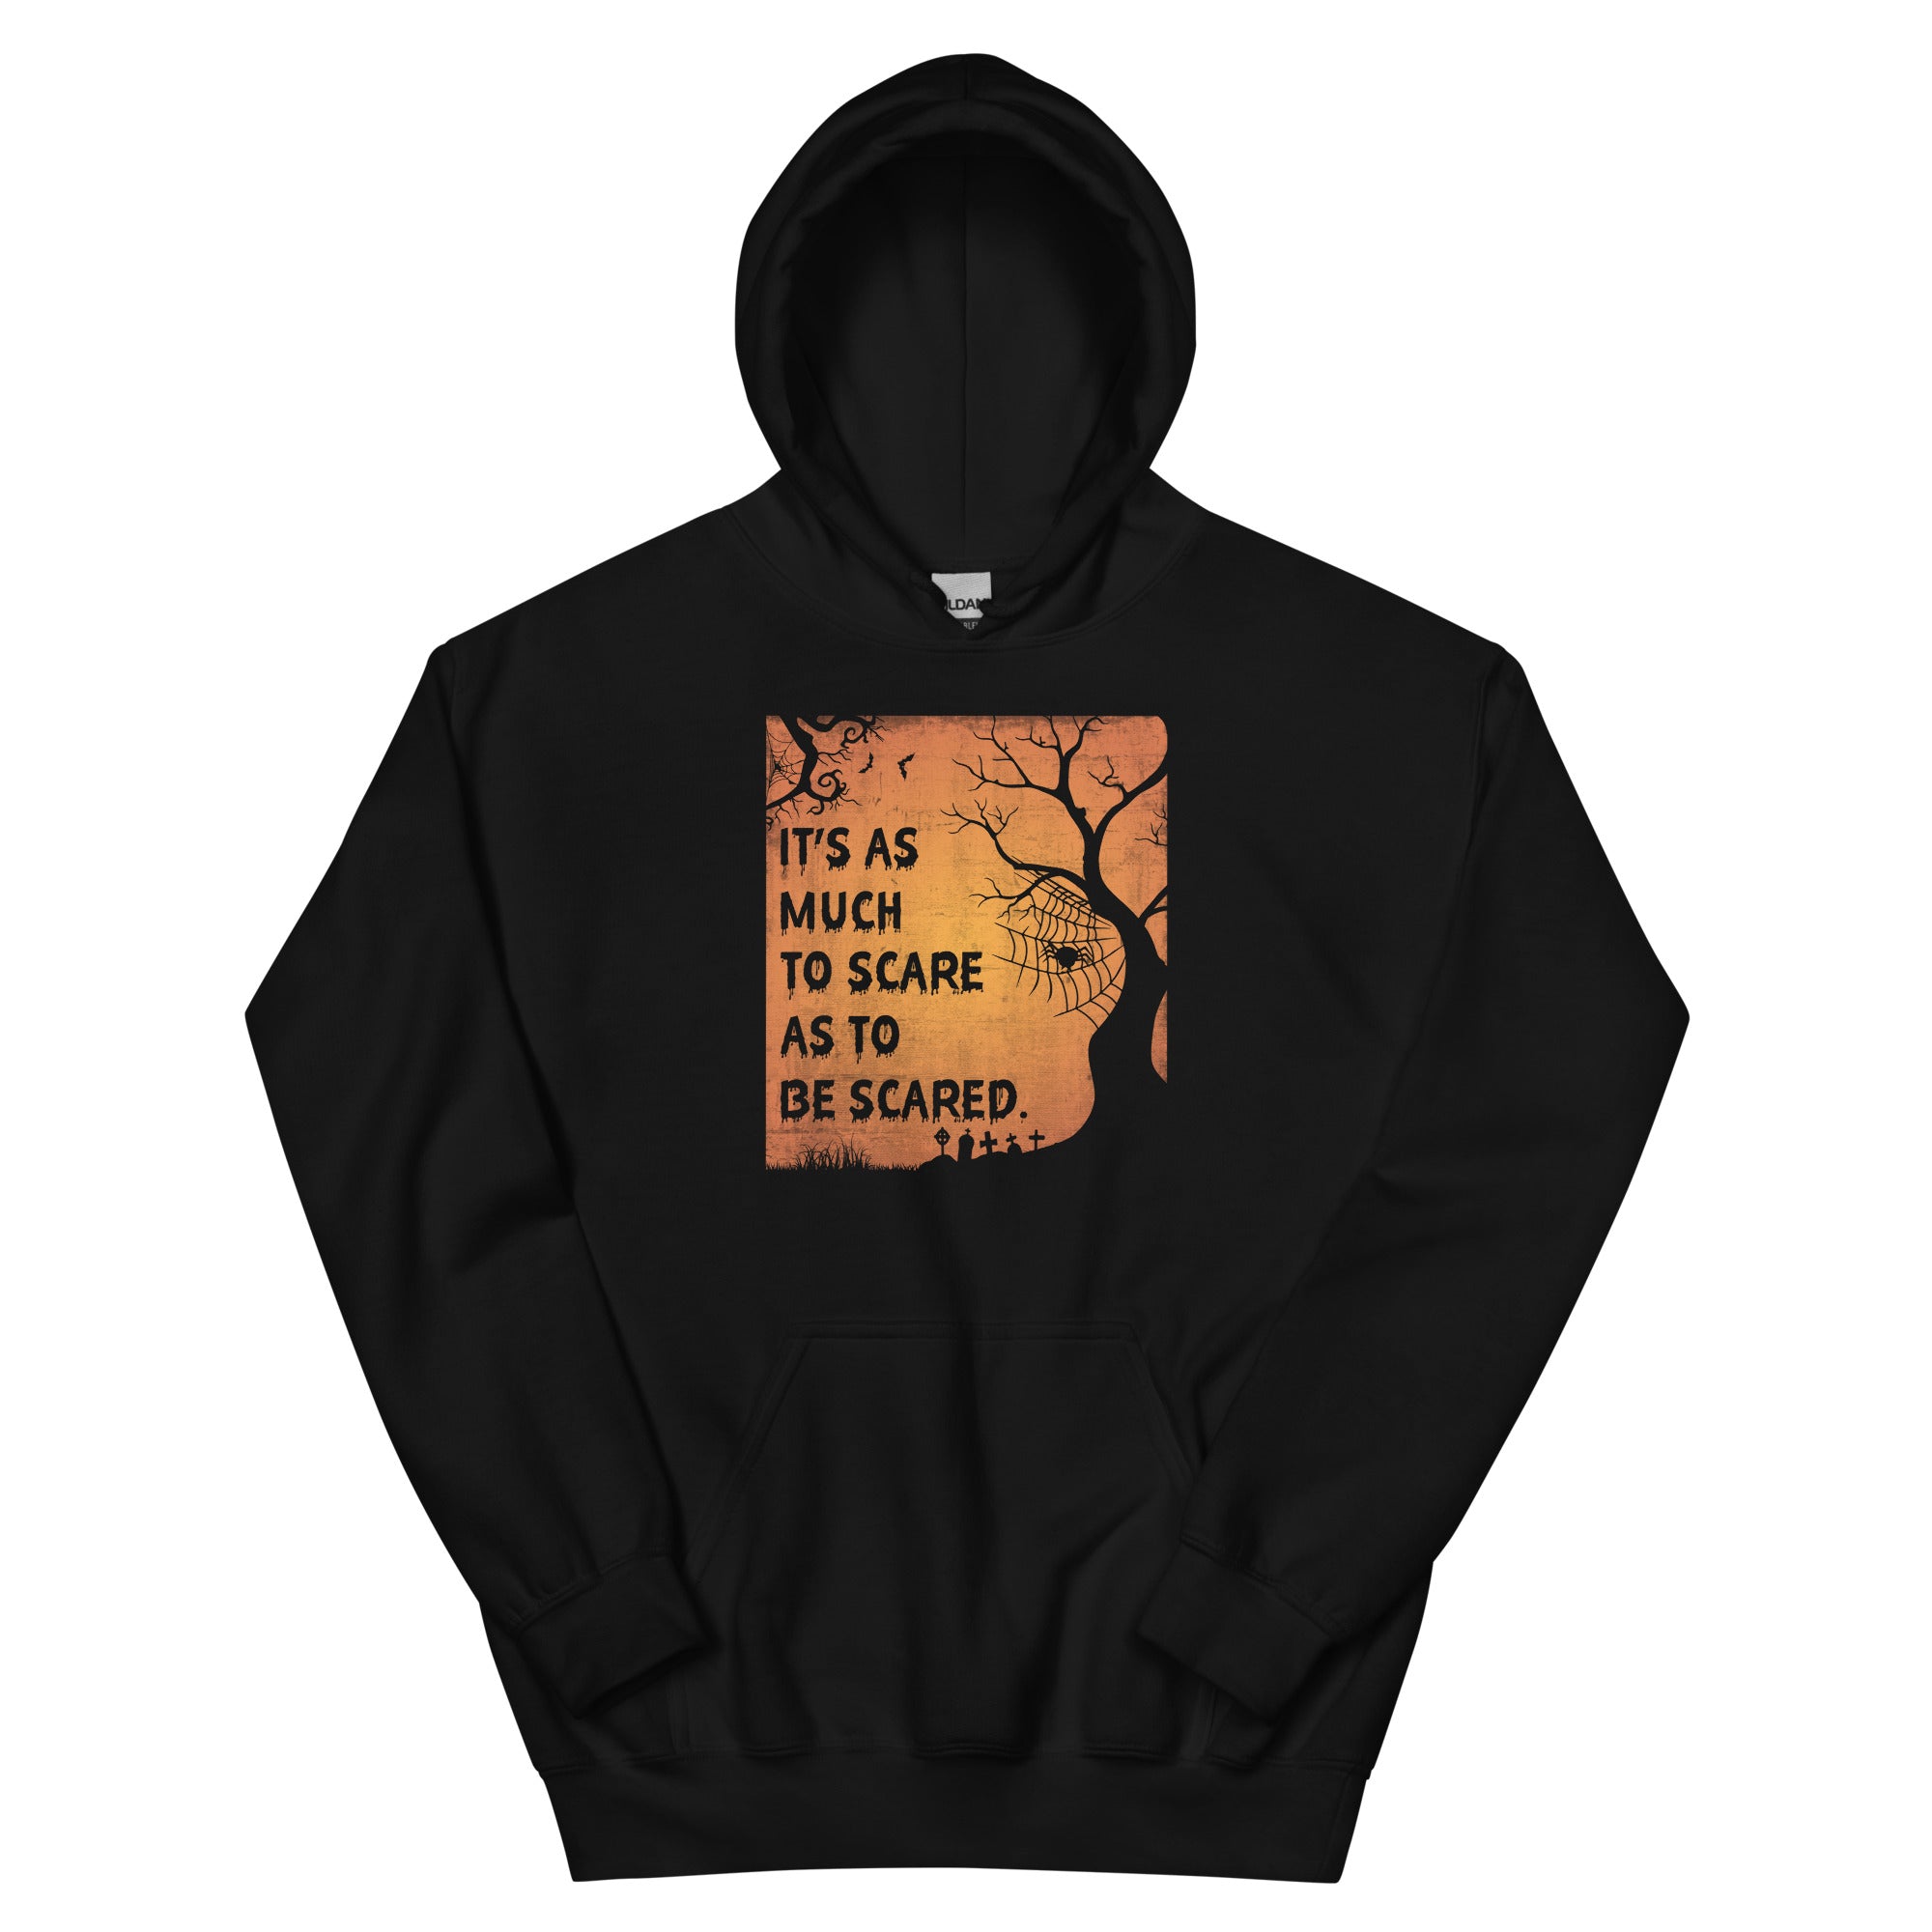 It's As Much To Scare As To Be Scared - Unisex Hoodie